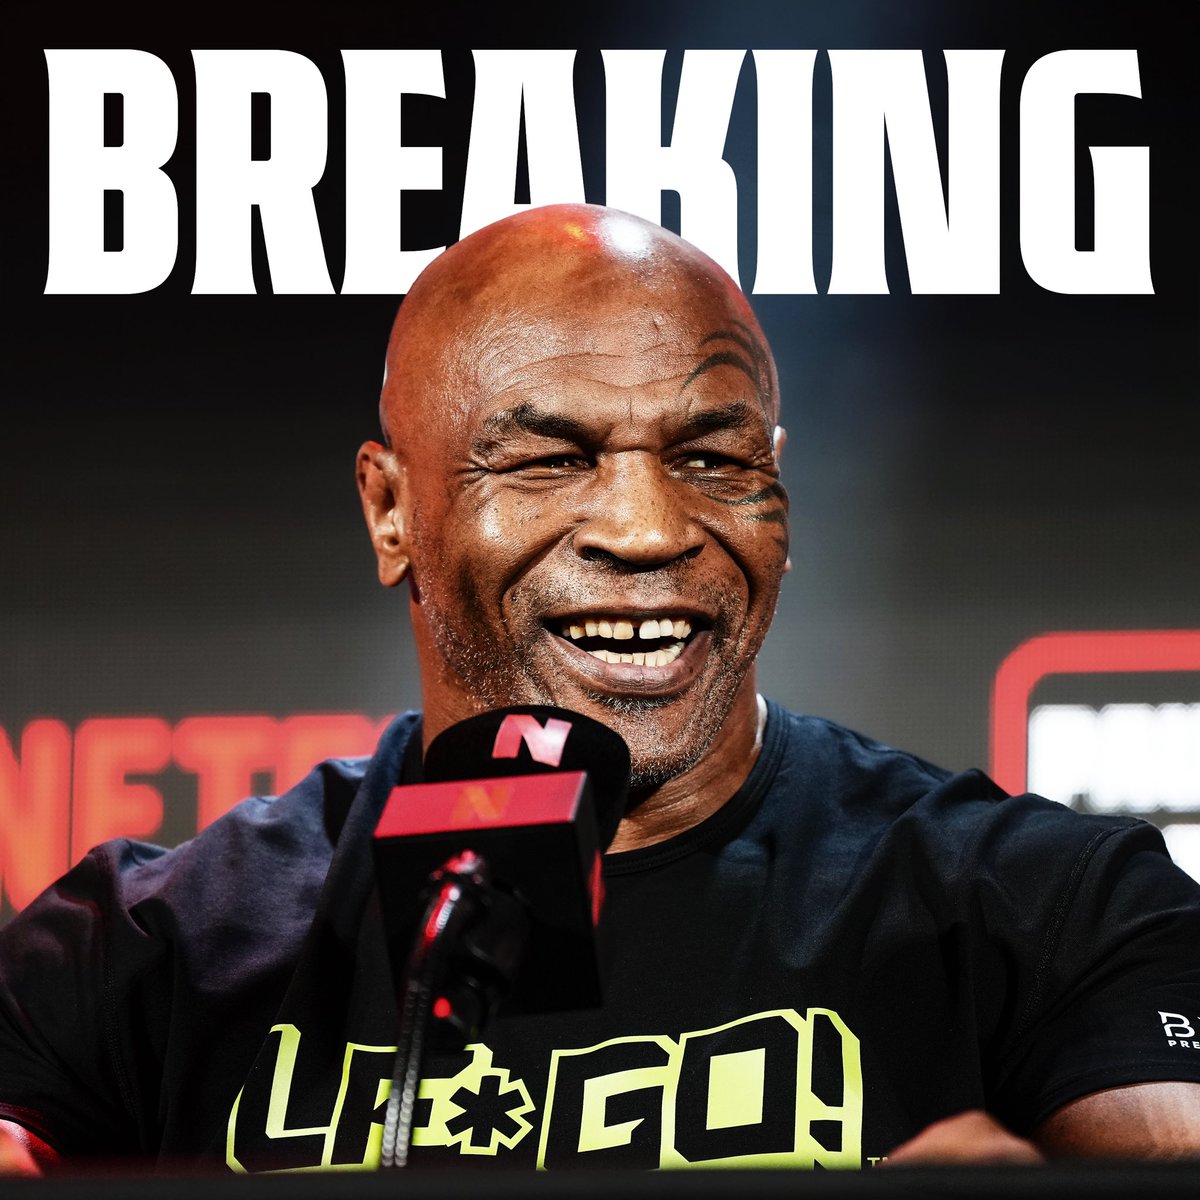 Mike Tyson reportedly suffered a “medical emergency” while boarding a plane last night “Before paramedics arrived, an announcement asking for a doctor and a message came on the screens.” The flight took off two hours late but it is unclear if Tyson was on it [@MirrorFighting]